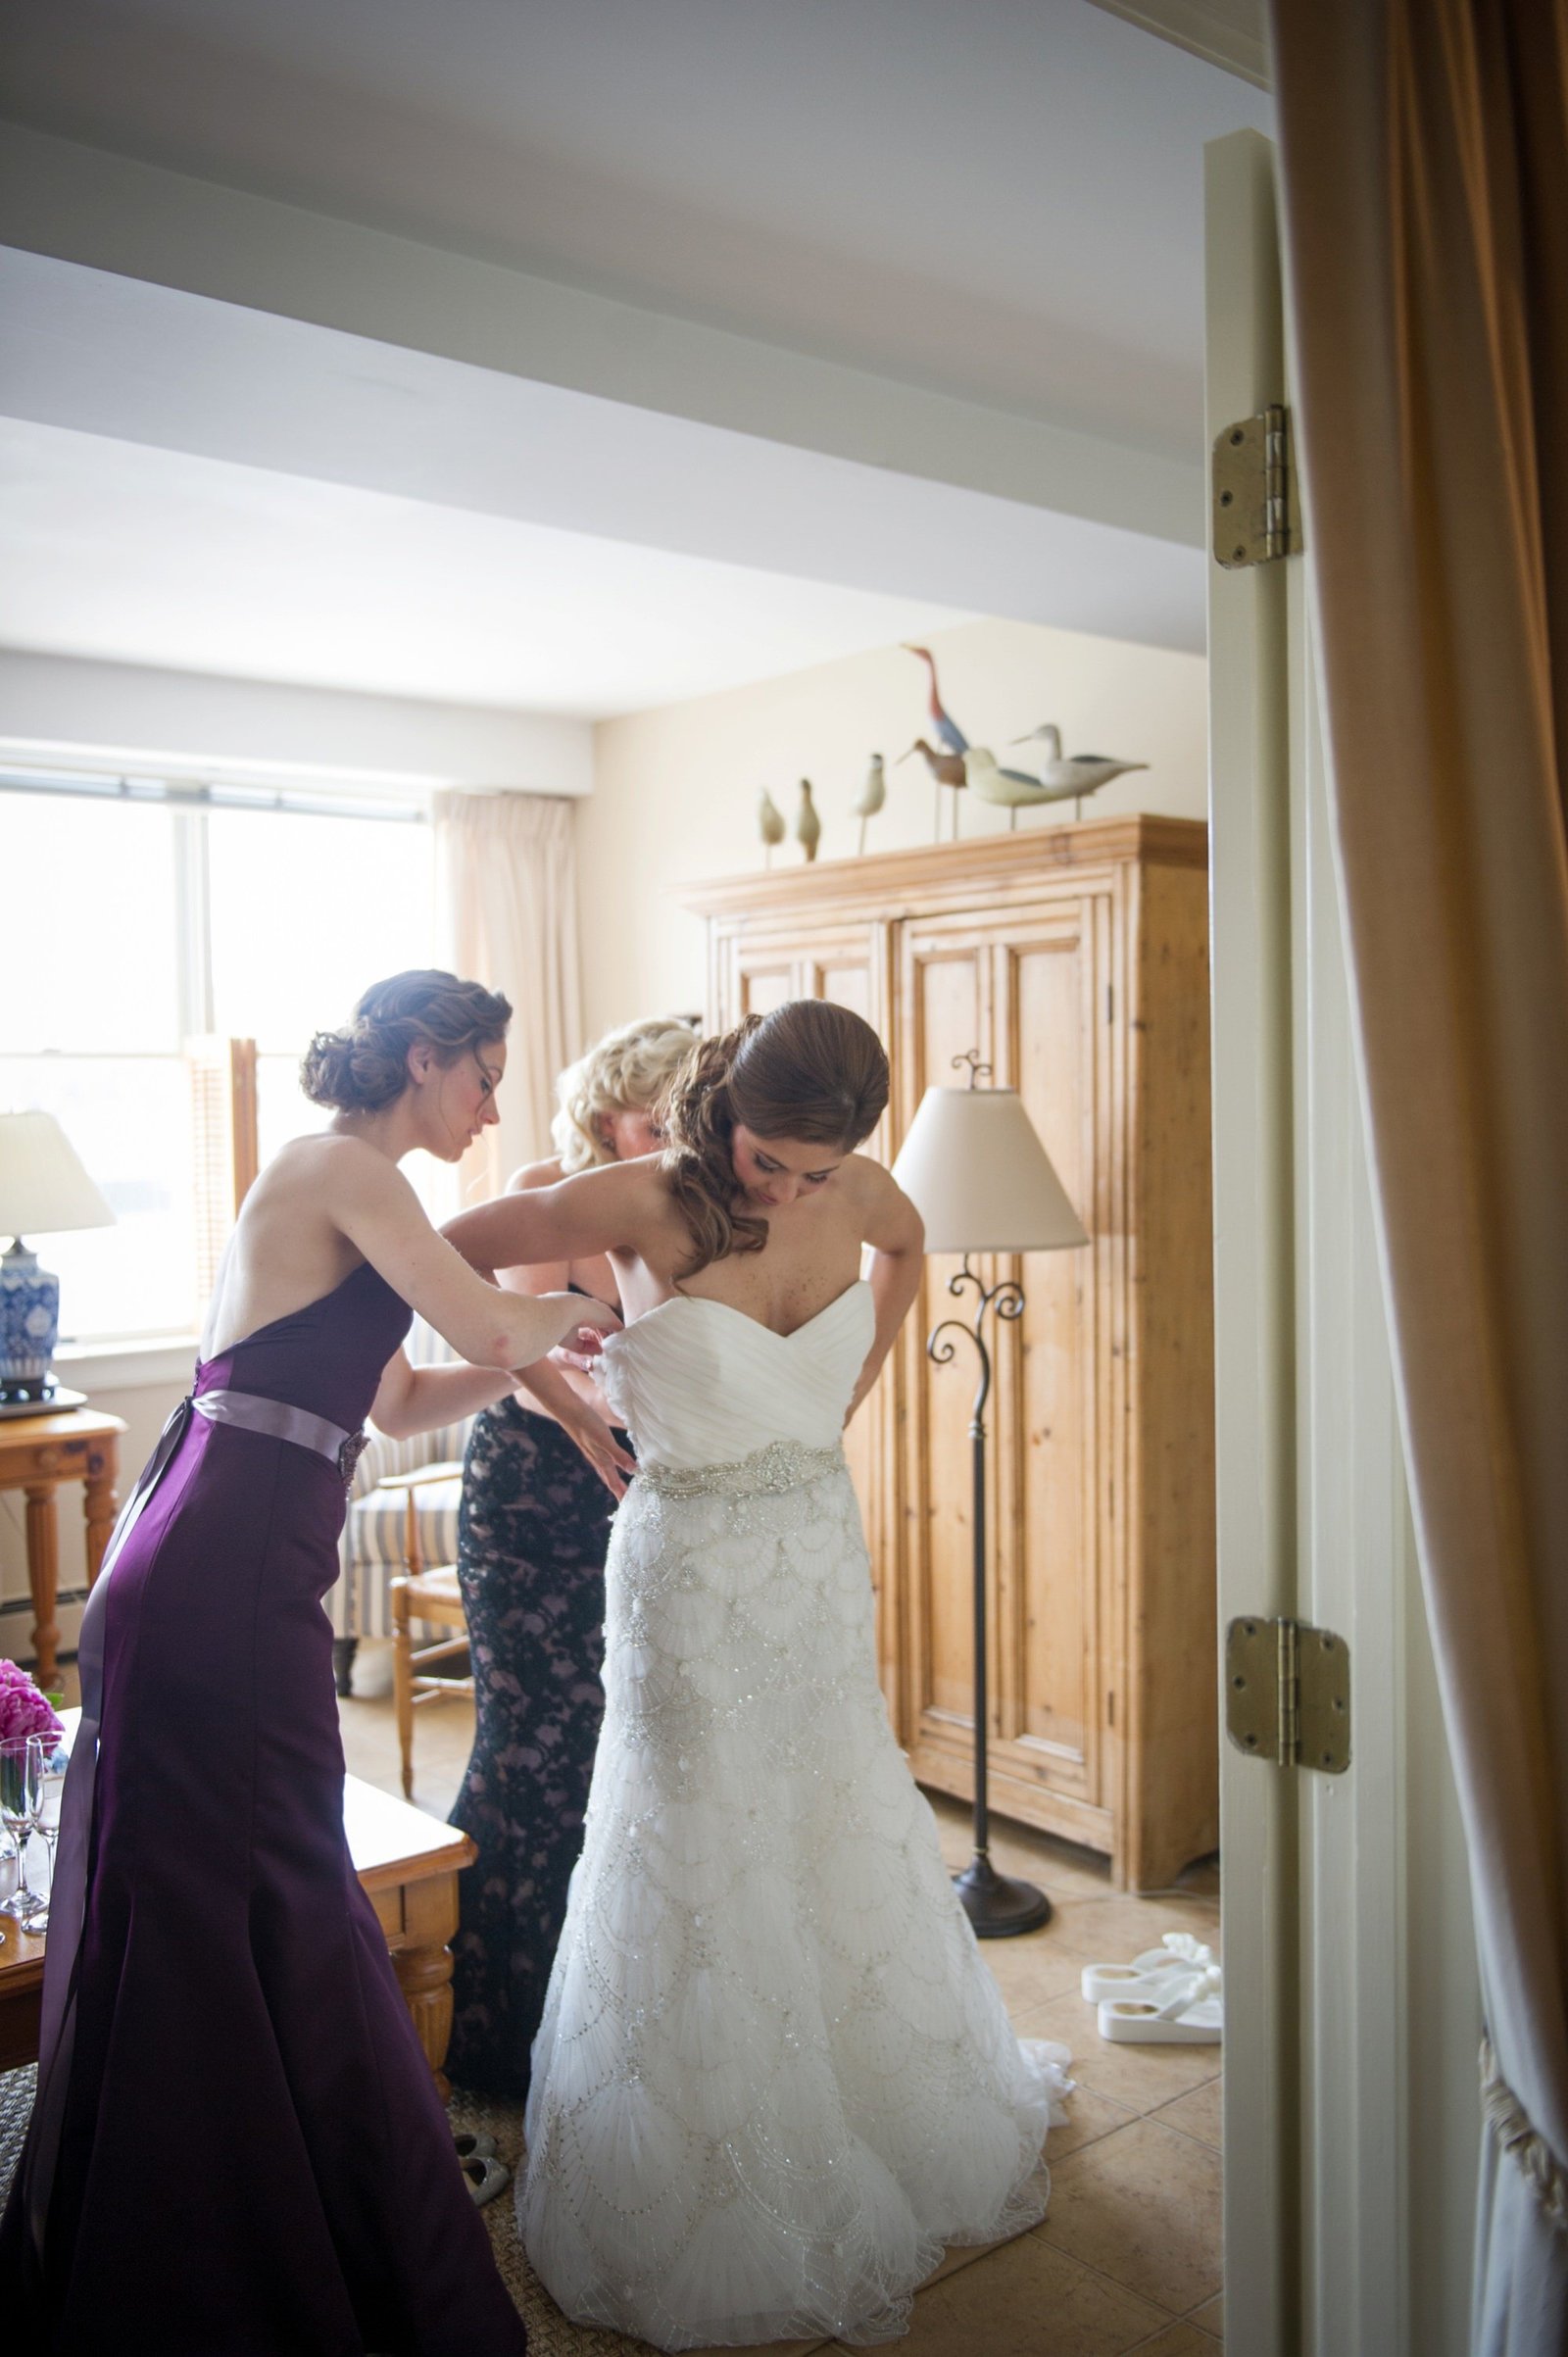 Bride getting ready details at The Branford House in Groton, CT